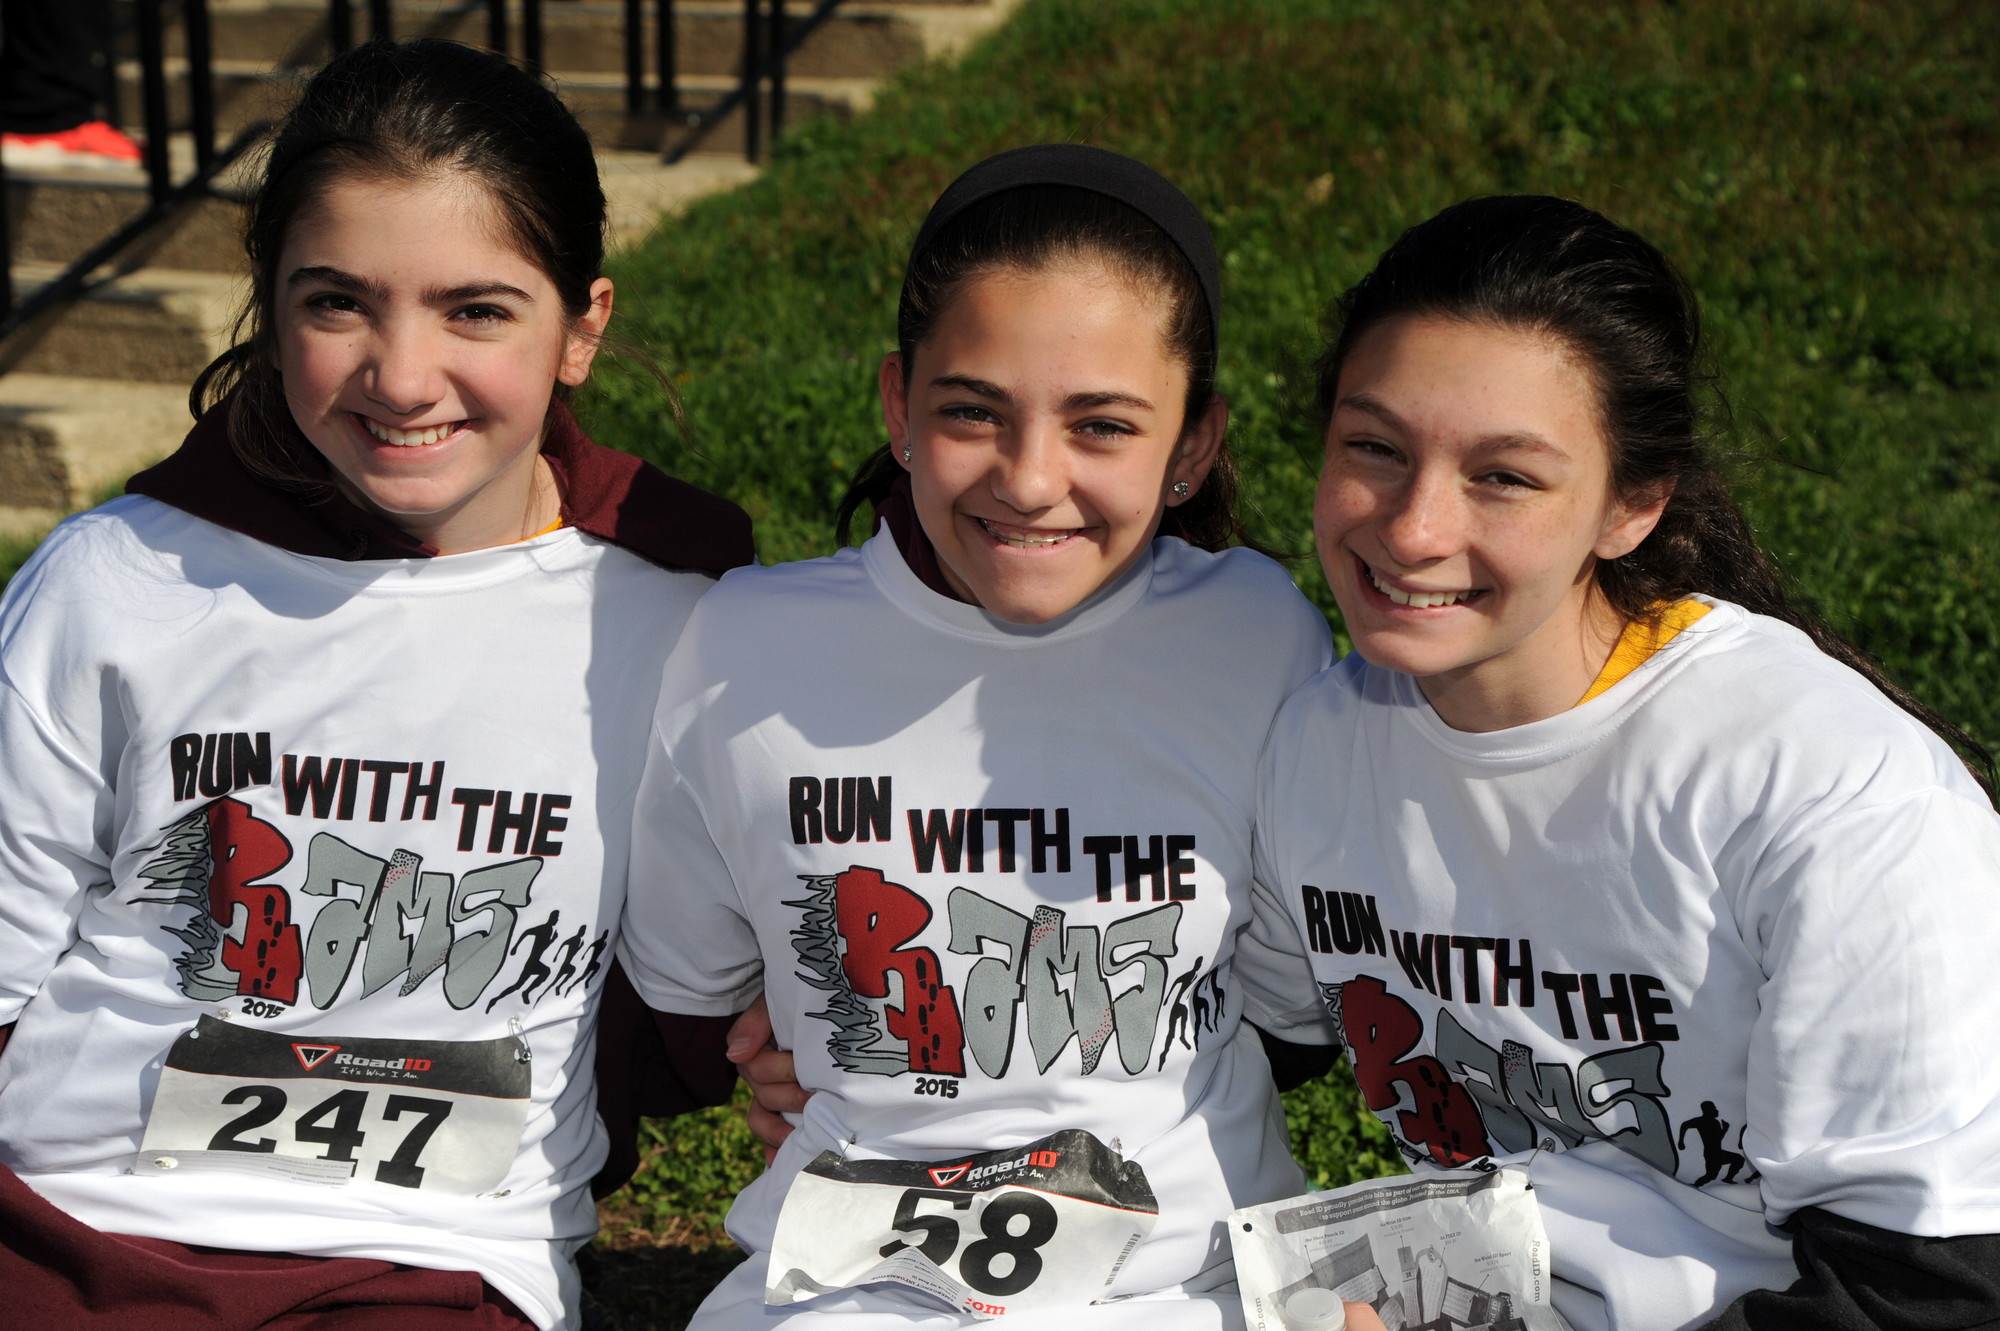 Catherine Posillico, 12, at left, Julia Hanrahan, 11, and Jessica Lydon, 12, are friends who participate in the race every year.